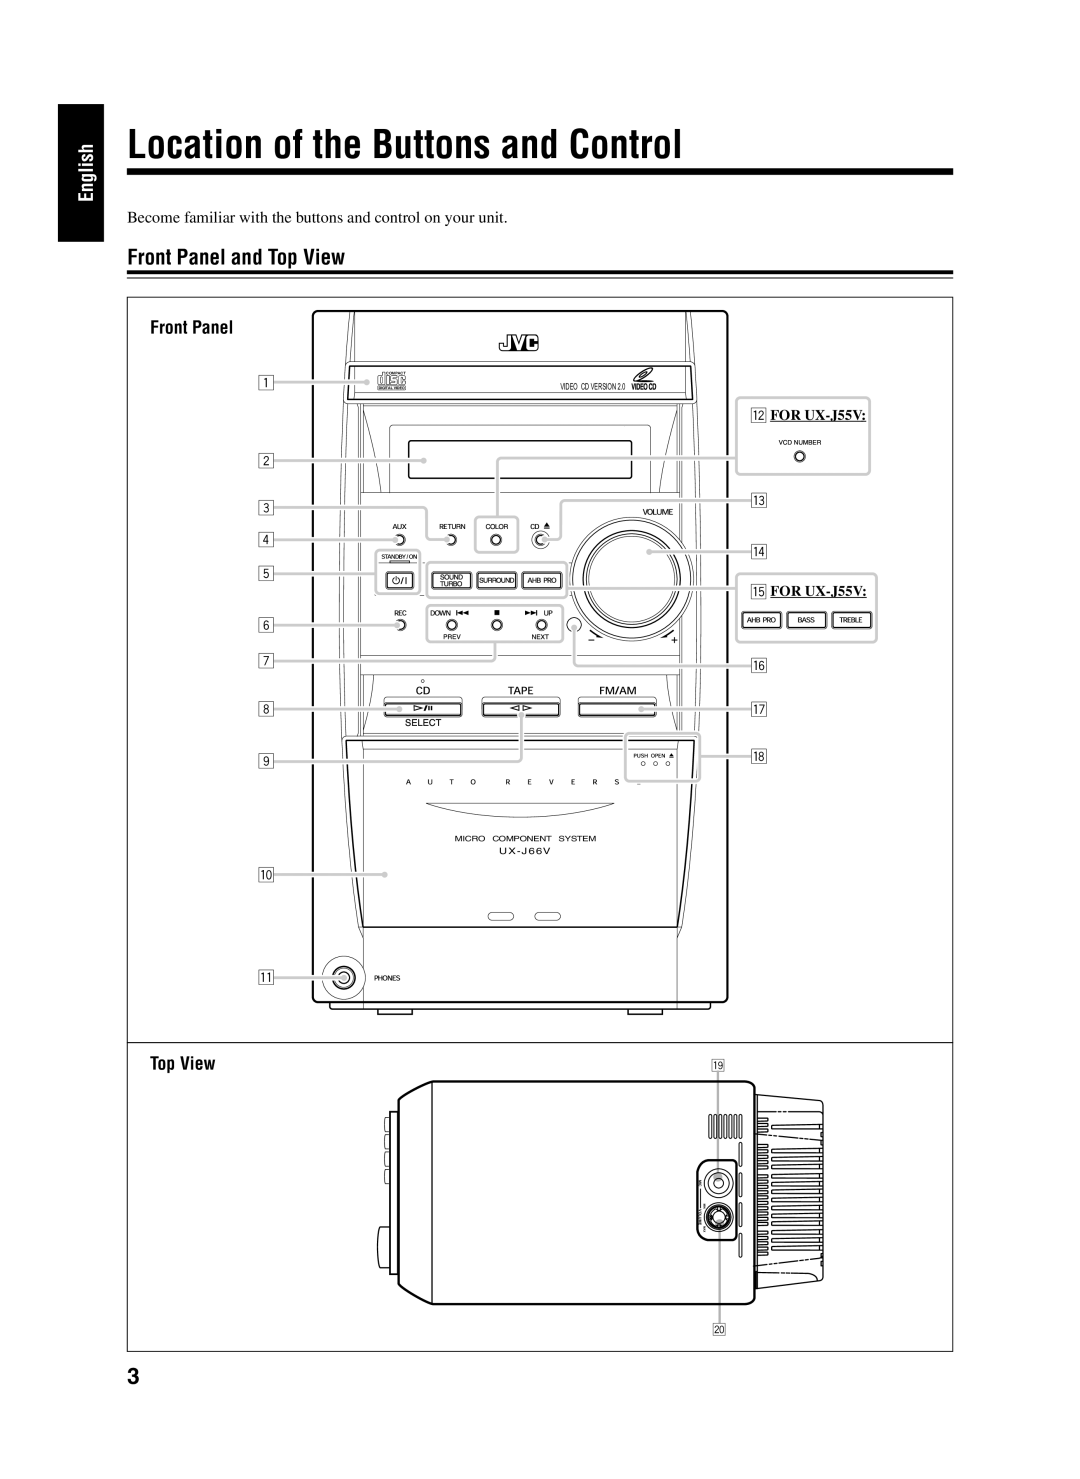 JVC GVT0116-003B Location of the Buttons and Control, Front Panel and Top View, English, 1 2 3 4 5 6 7 8 9 p, U X - J 